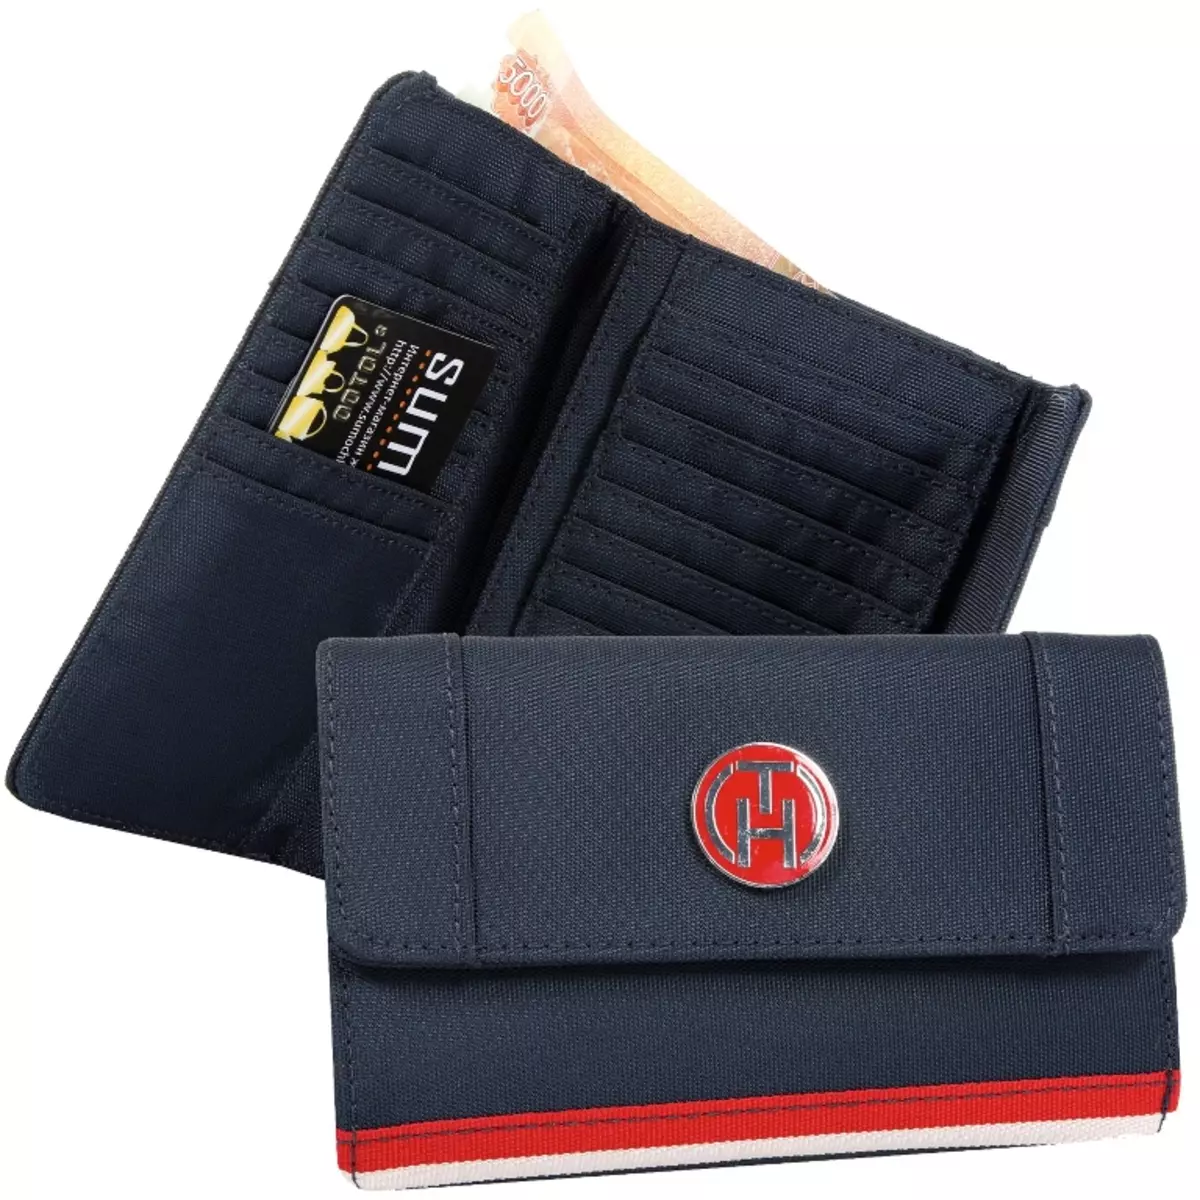 Brand Women's Wallets (100 photos): Overview of the Assortment of Popular Brands Eleganzza, Montblanc, Somuch and Others 15168_33